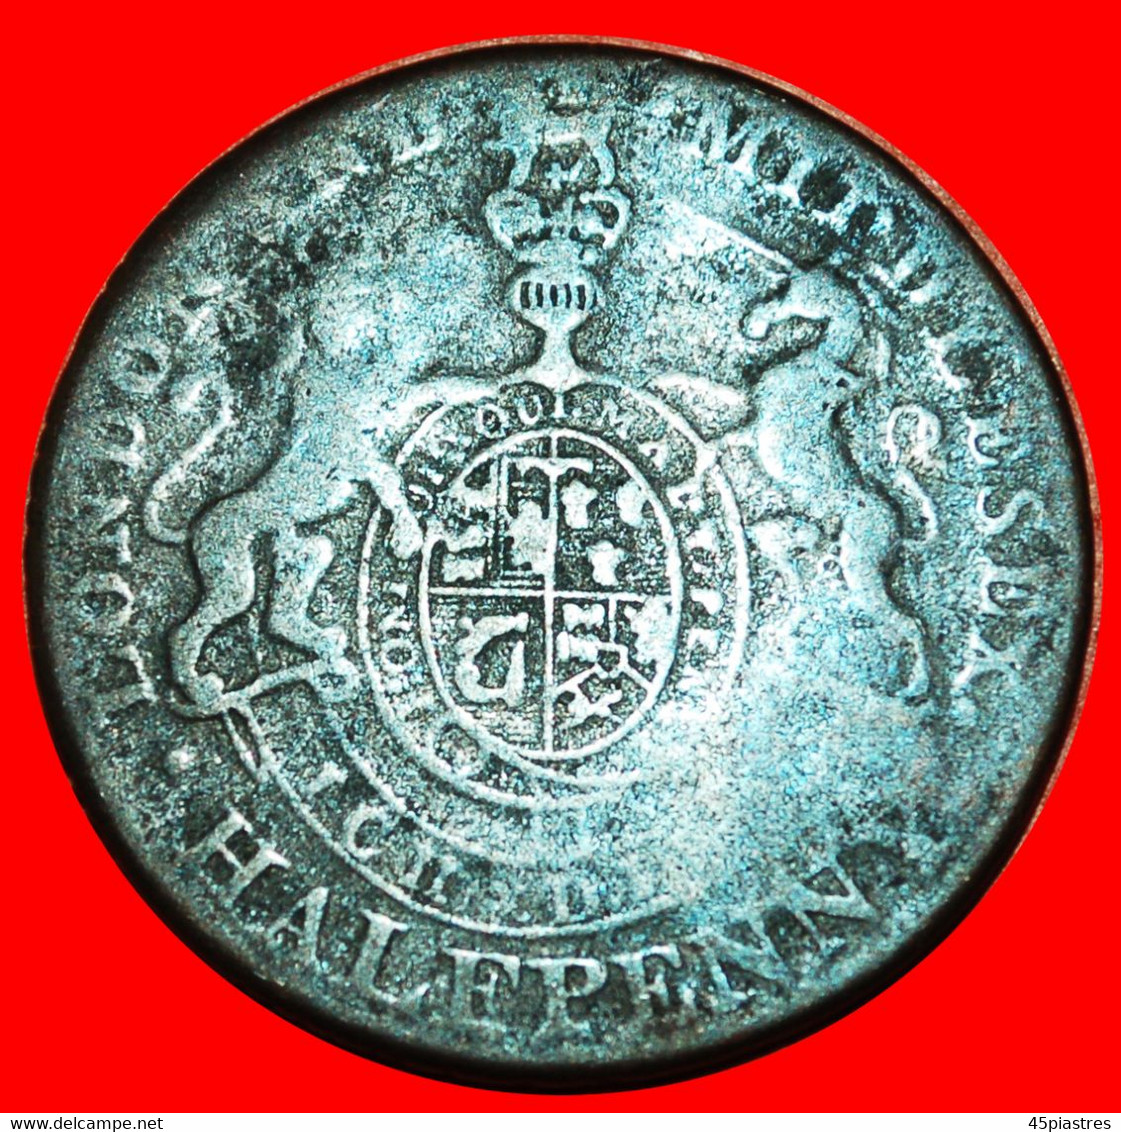 * CONDER PENNY: IRELAND And GREAT BRITAIN ★ HALFPENNY (1787-1797) GEO PRINCE OF WALES! LOW START ★ NO RESERVE! - Maundy Sets & Herdenkings